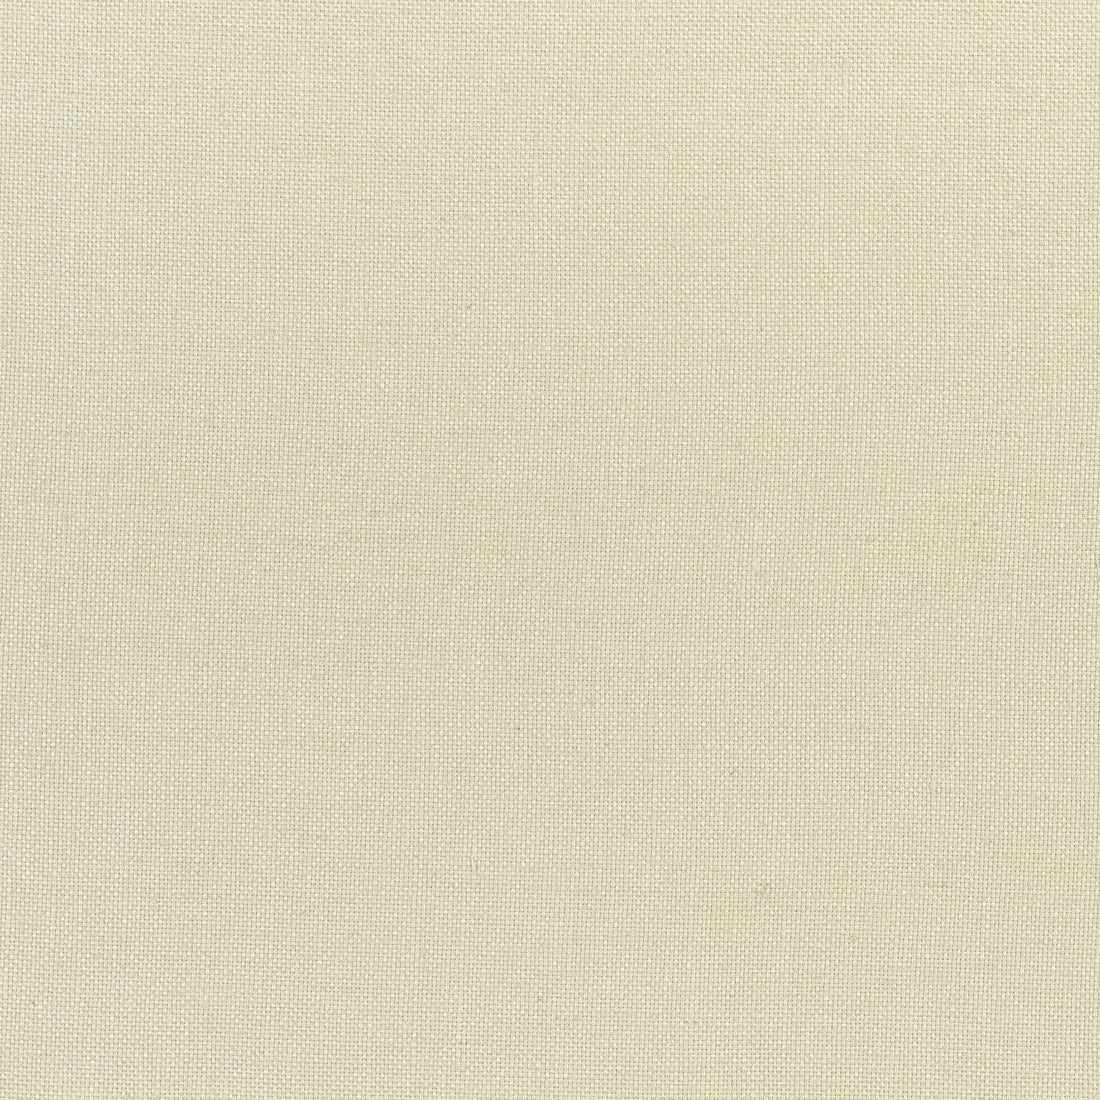 Dawn Linen fabric in green tea color - pattern number FWW7673 - by Thibaut in the Palisades collection